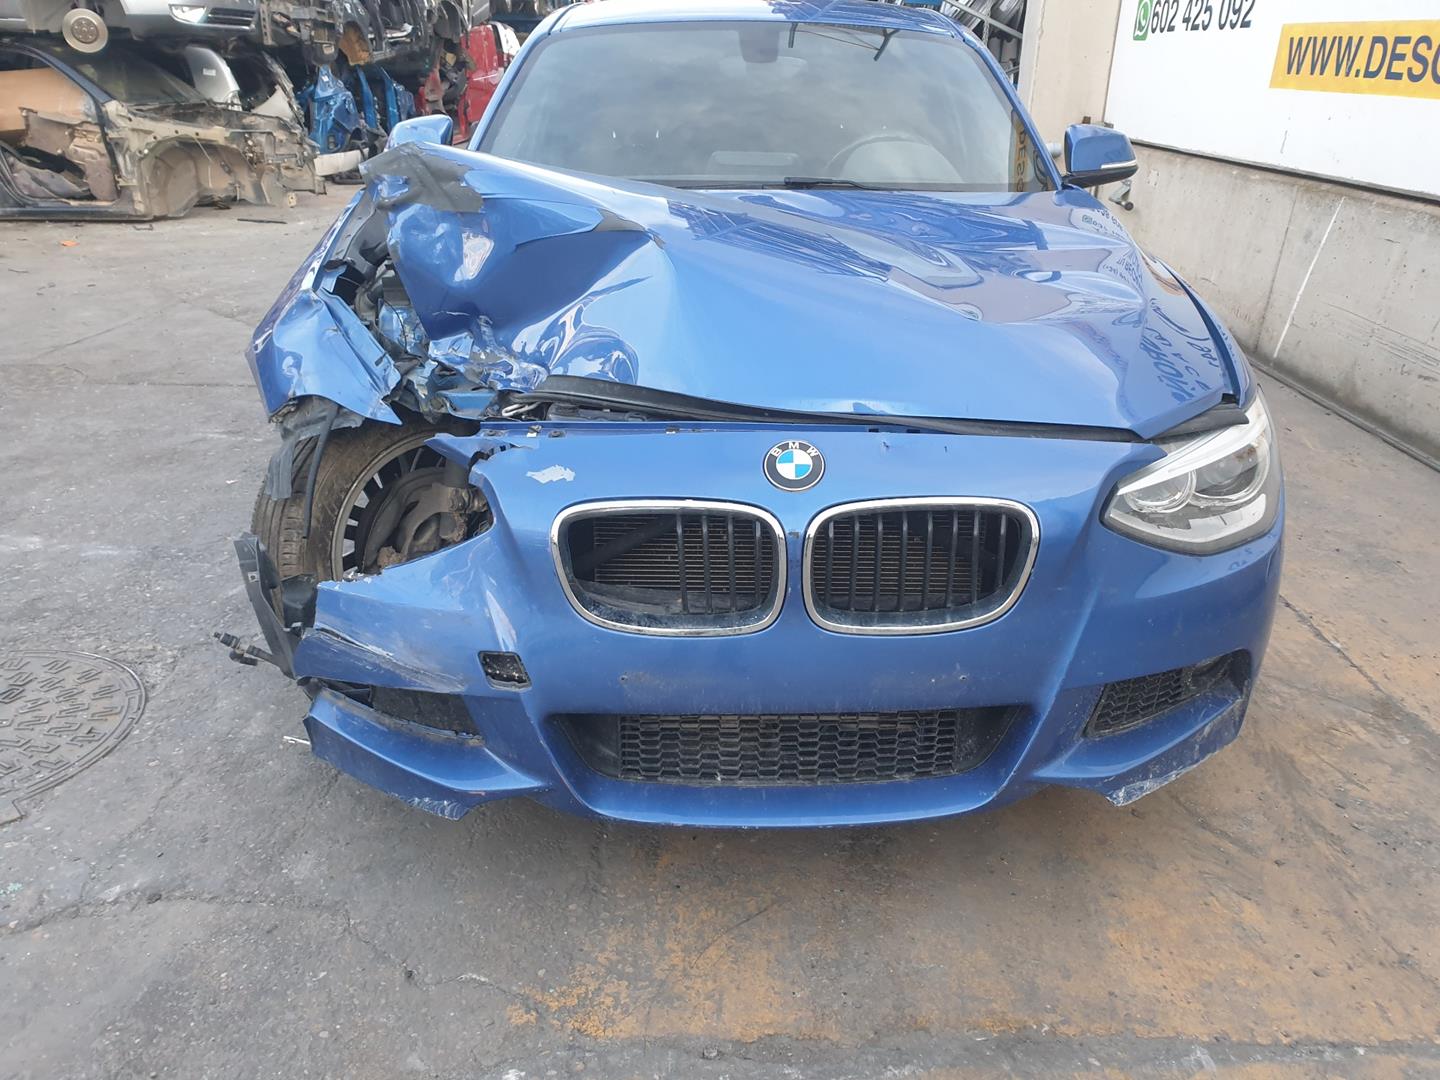 BMW 1 Series F20/F21 (2011-2020) Other Body Parts 51247248535, 7248535 19881396